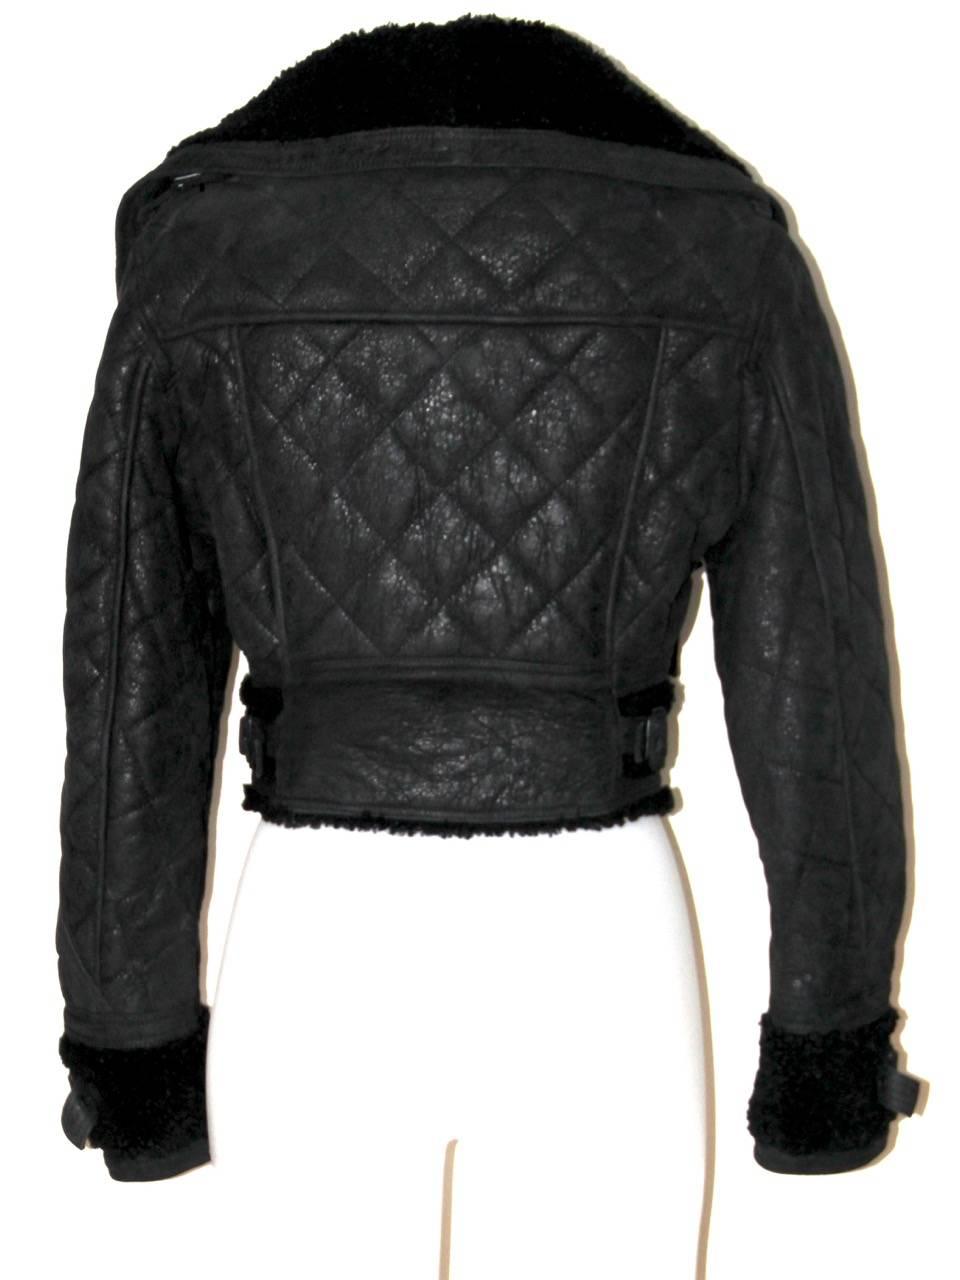 Signature Aviator Jacket by Burberry. Masterpiece from the fall-winter 2010/11 runway collection. All black, very rare. The leather has been tumbled to create a broken vintage effect

Collection: Winter 2010/11
Fabric: Quilted Shearling